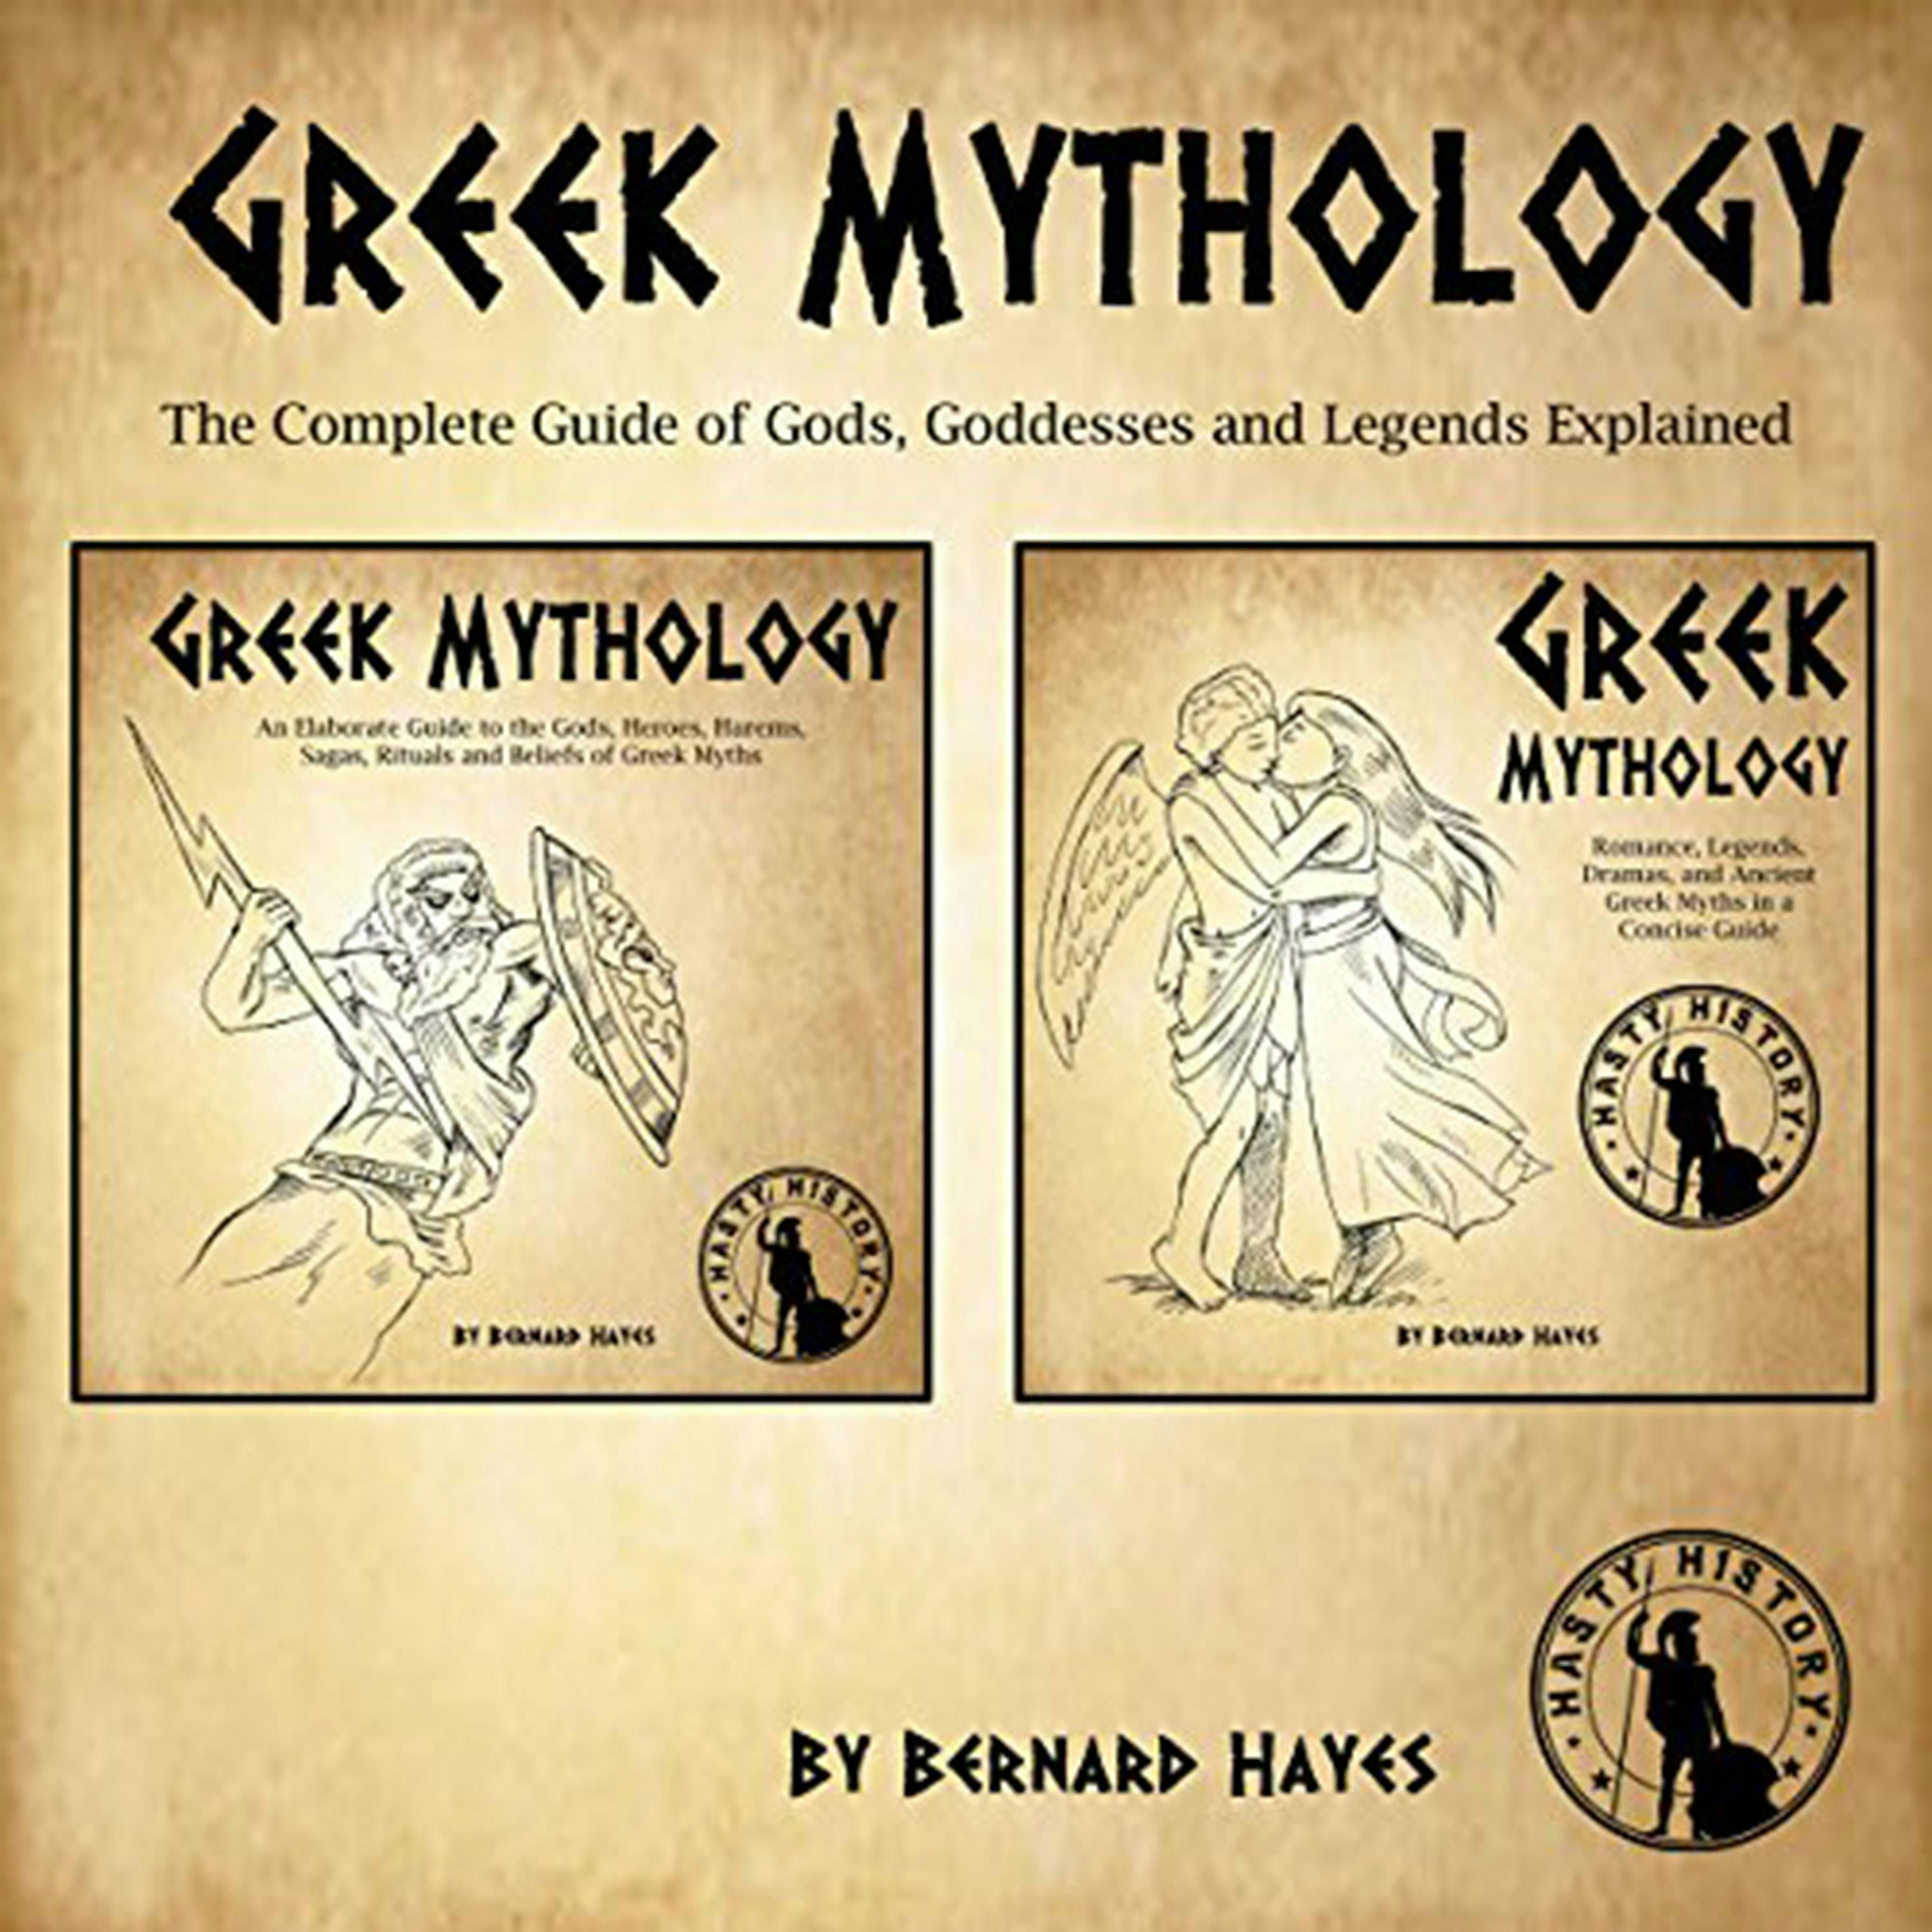 Greek Mythology: An Elaborate Guide to the Gods, Heroes, Harems, Sagas, Rituals and Beliefs of Greek Myths - undefined